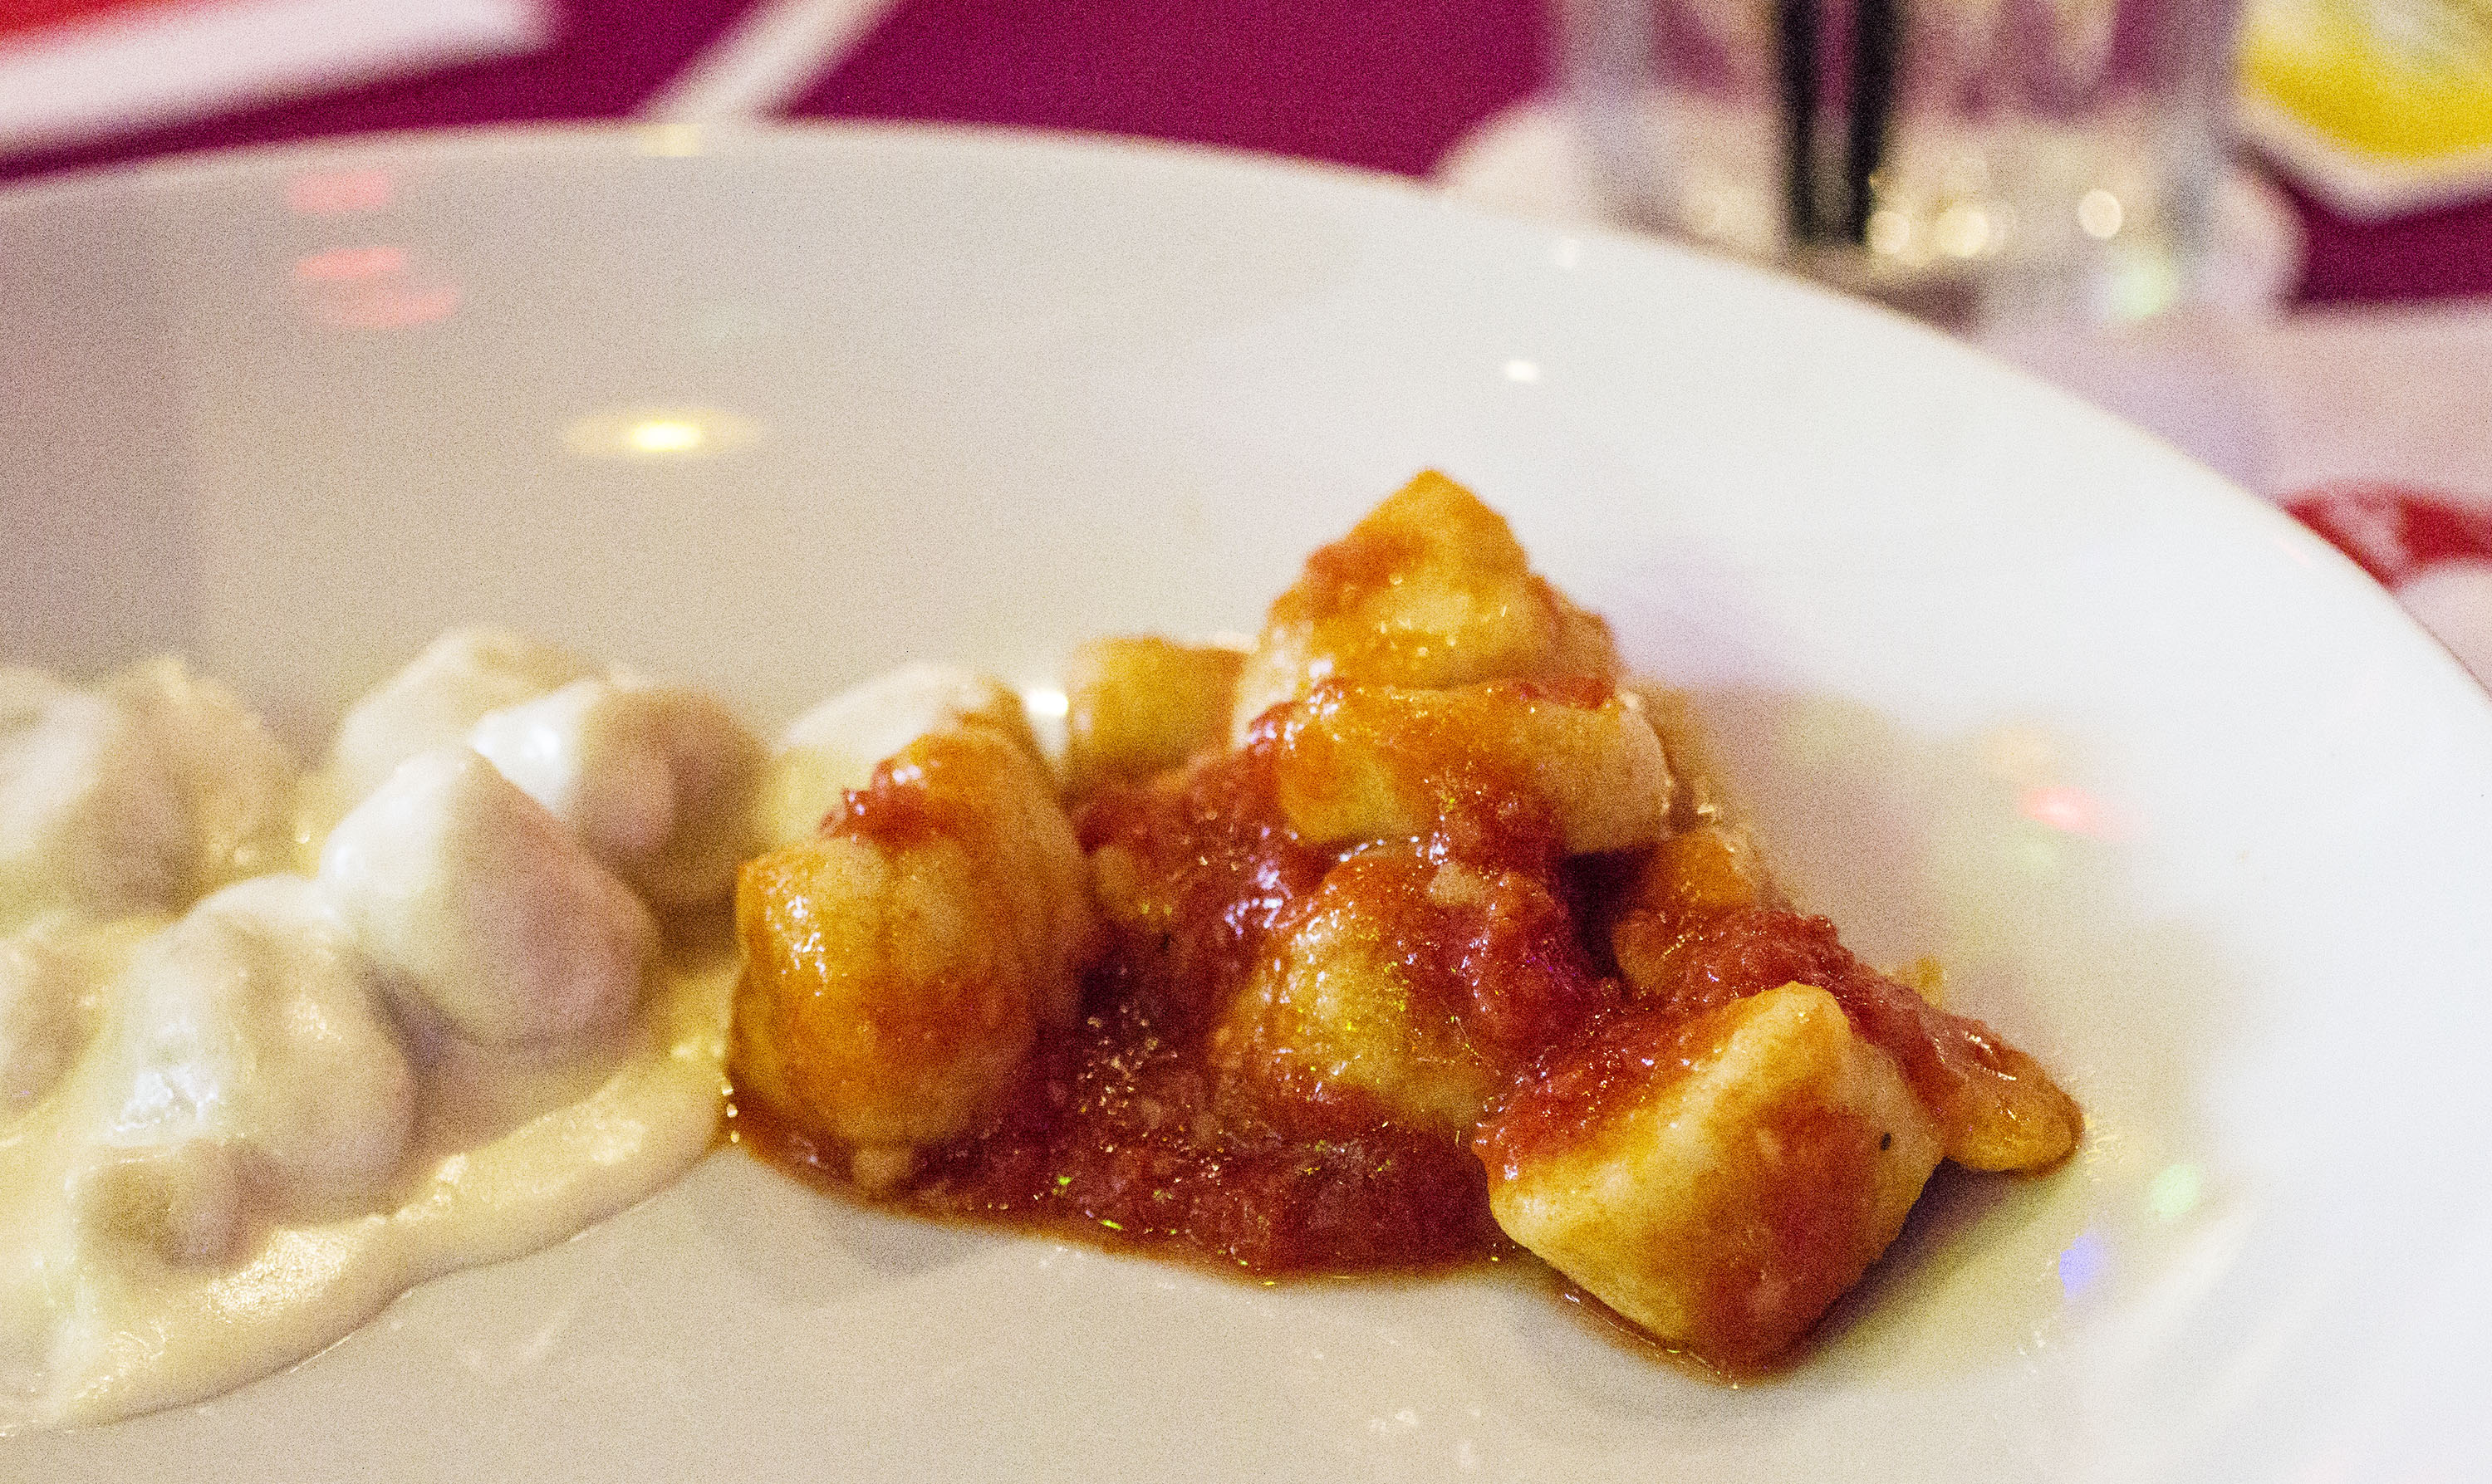 Try all 10 varieties of gnocchi during Piola's all-you-can-eat Gnocchi Day during the 29th of every month.